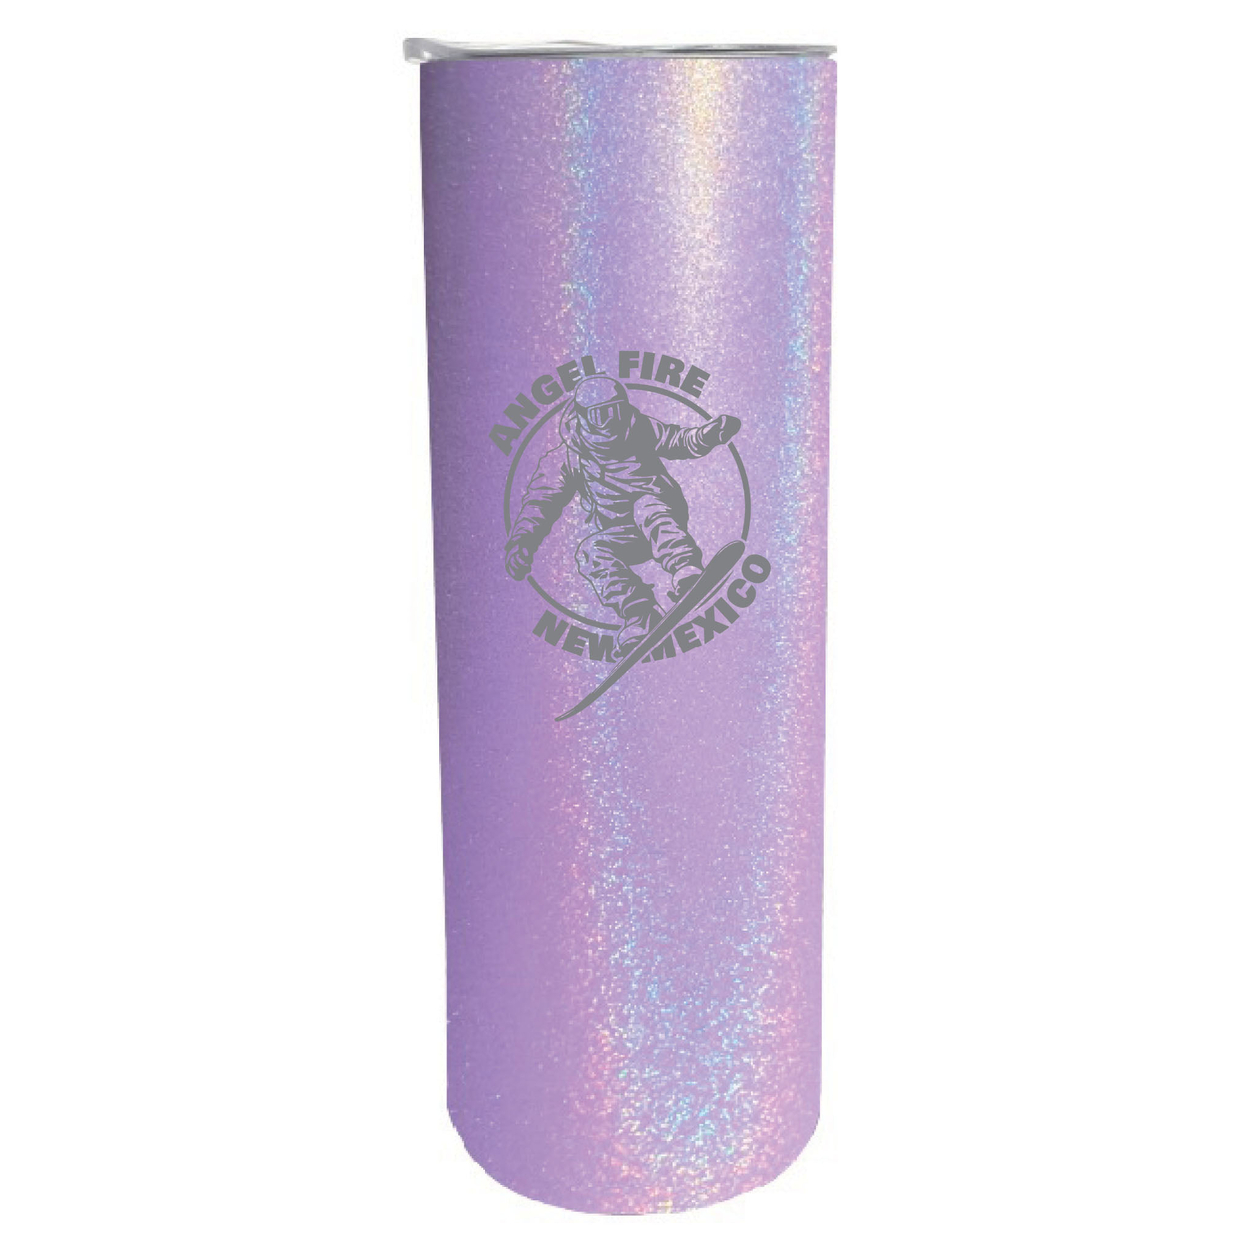 Angel Fire New Mexico Souvenir 20 Oz Engraved Insulated Stainless Steel Skinny Tumbler - Seafoam,,Single Unit